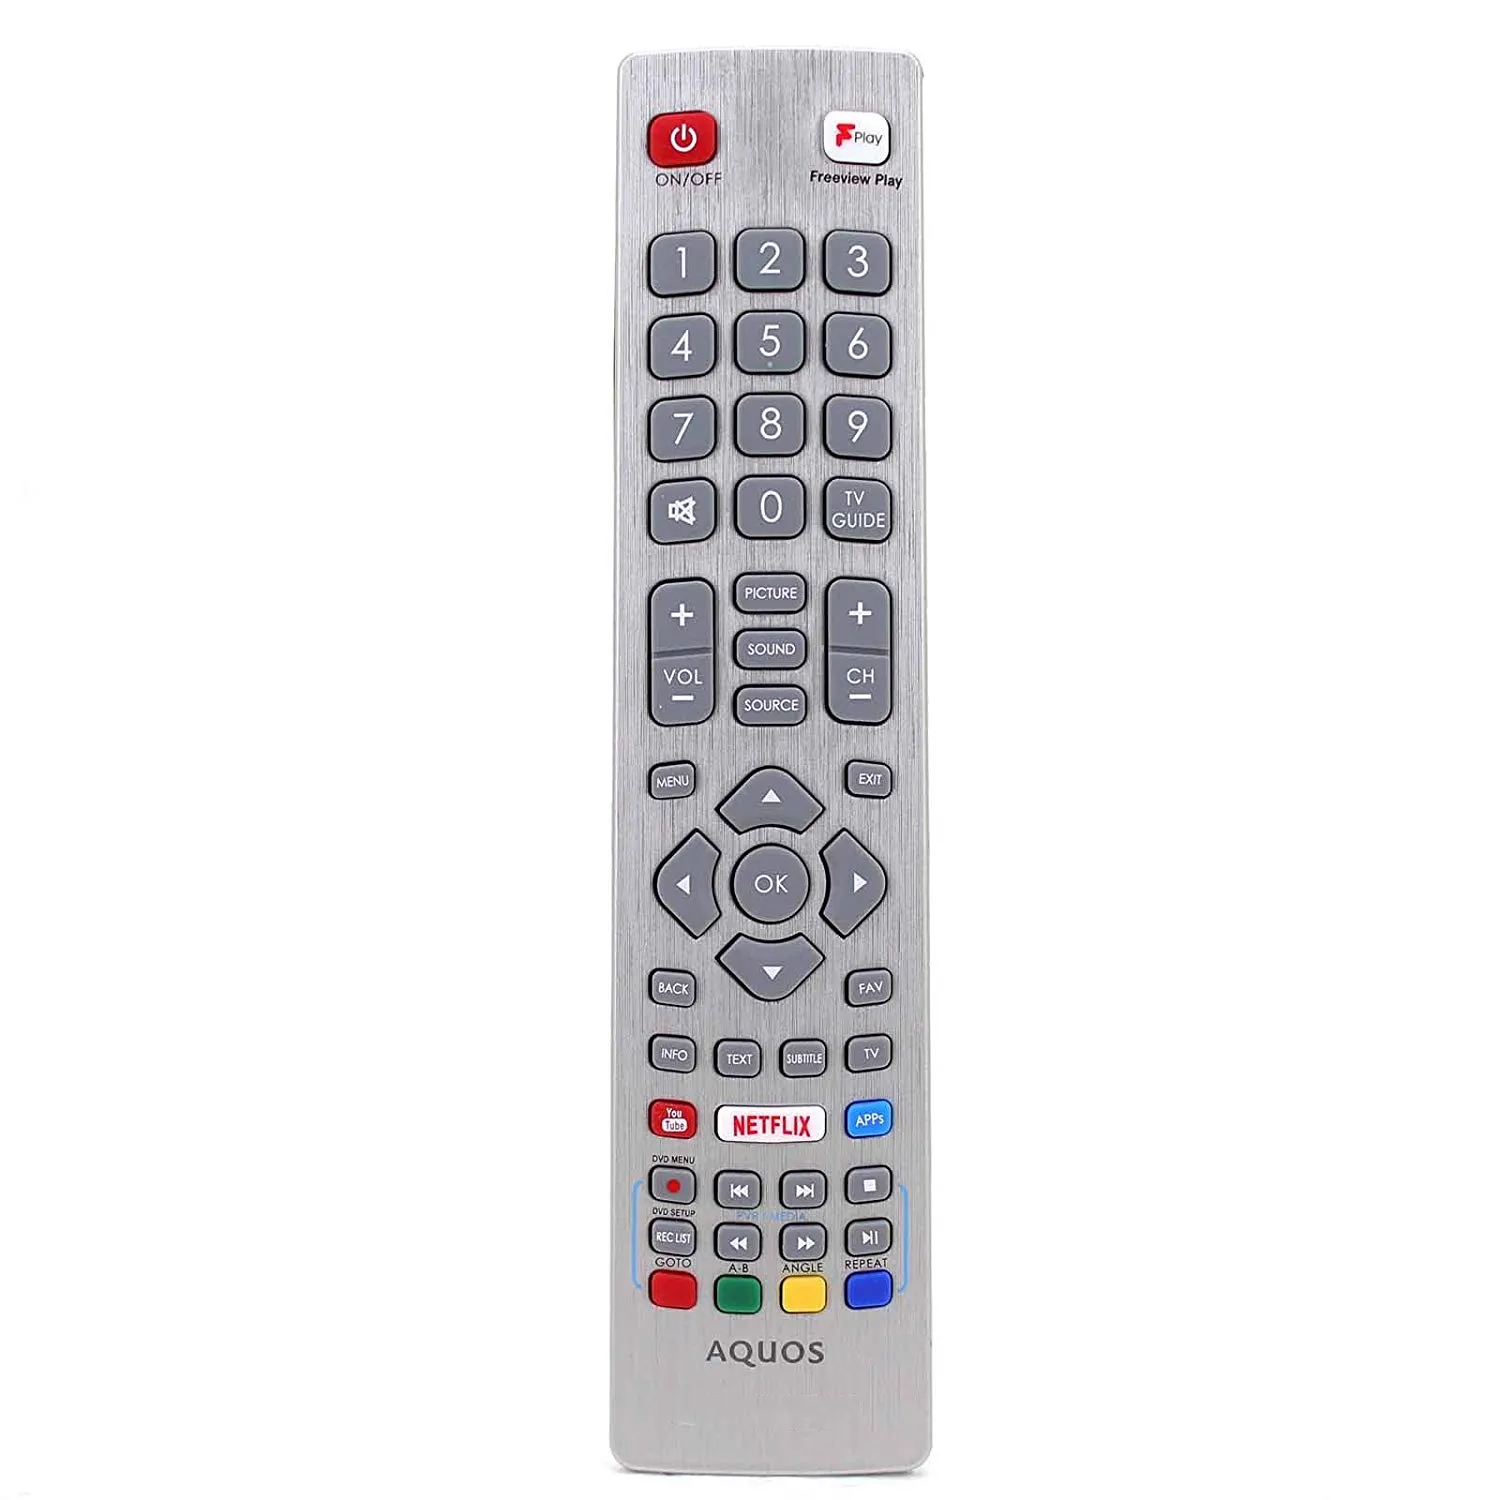 2020 new Original IR Remote Control For Shar Aquos 3D Smart TV google Play You-tube Netflix APPs SHWRMC0115 Android TV controller